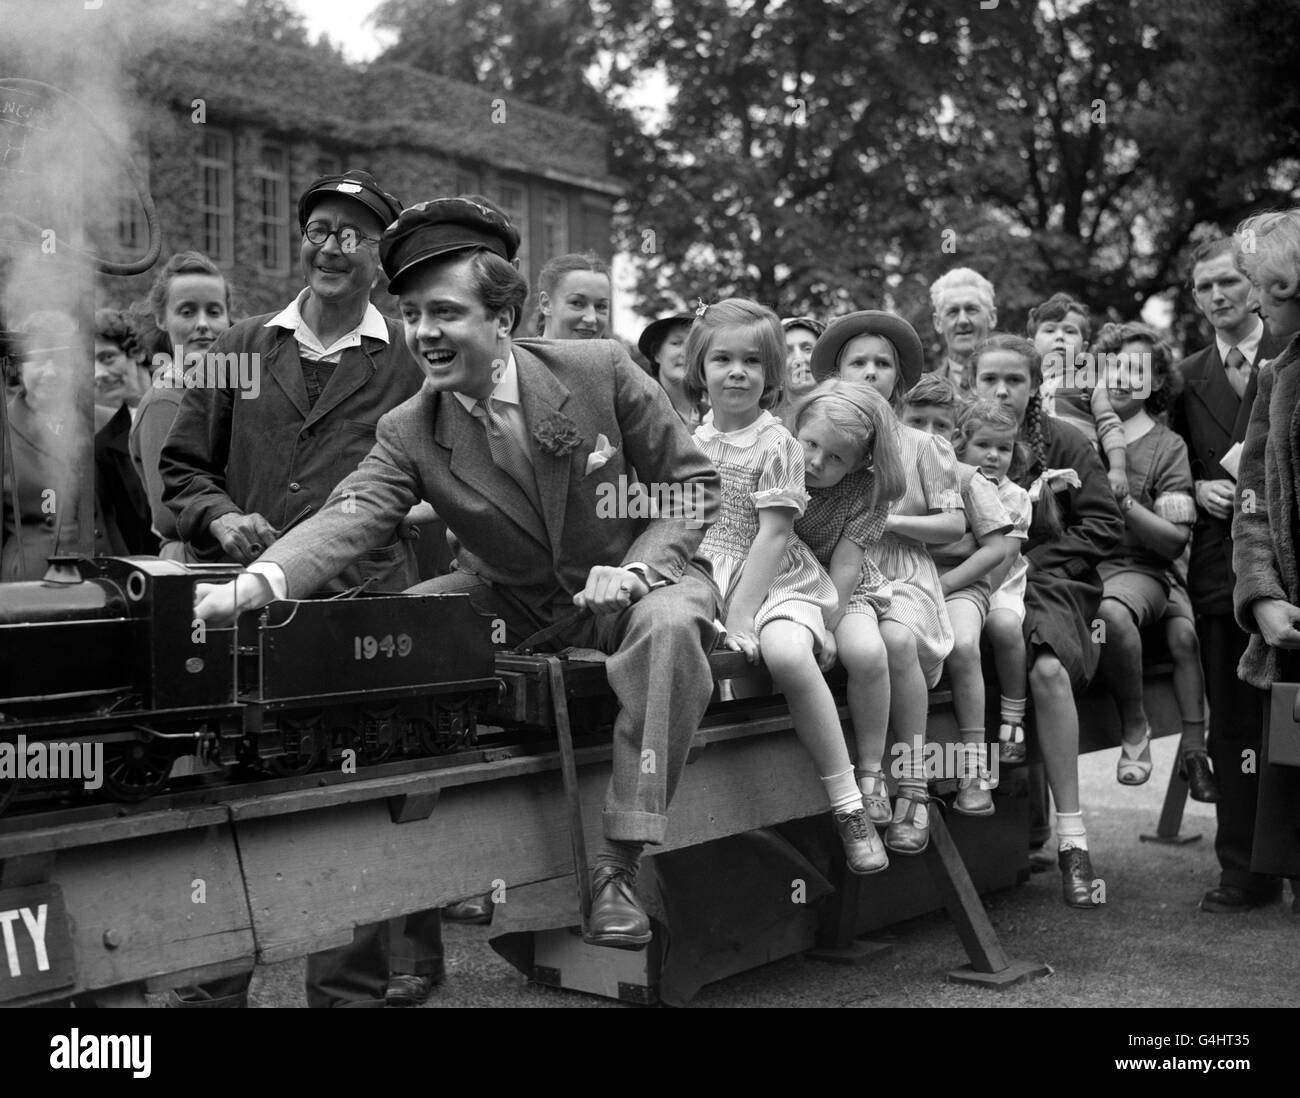 FILM ACTOR RICHARD ATTENBOROUGH PILOTED A TRAINLOAD OF CHILDREN AROUND THE GROUNDS OF THE MODEL RAILWAY DURING THE CARNIVAL AT THE BEDFORD COLLEGE, REGENTS PARK IN LONDON Stock Photo